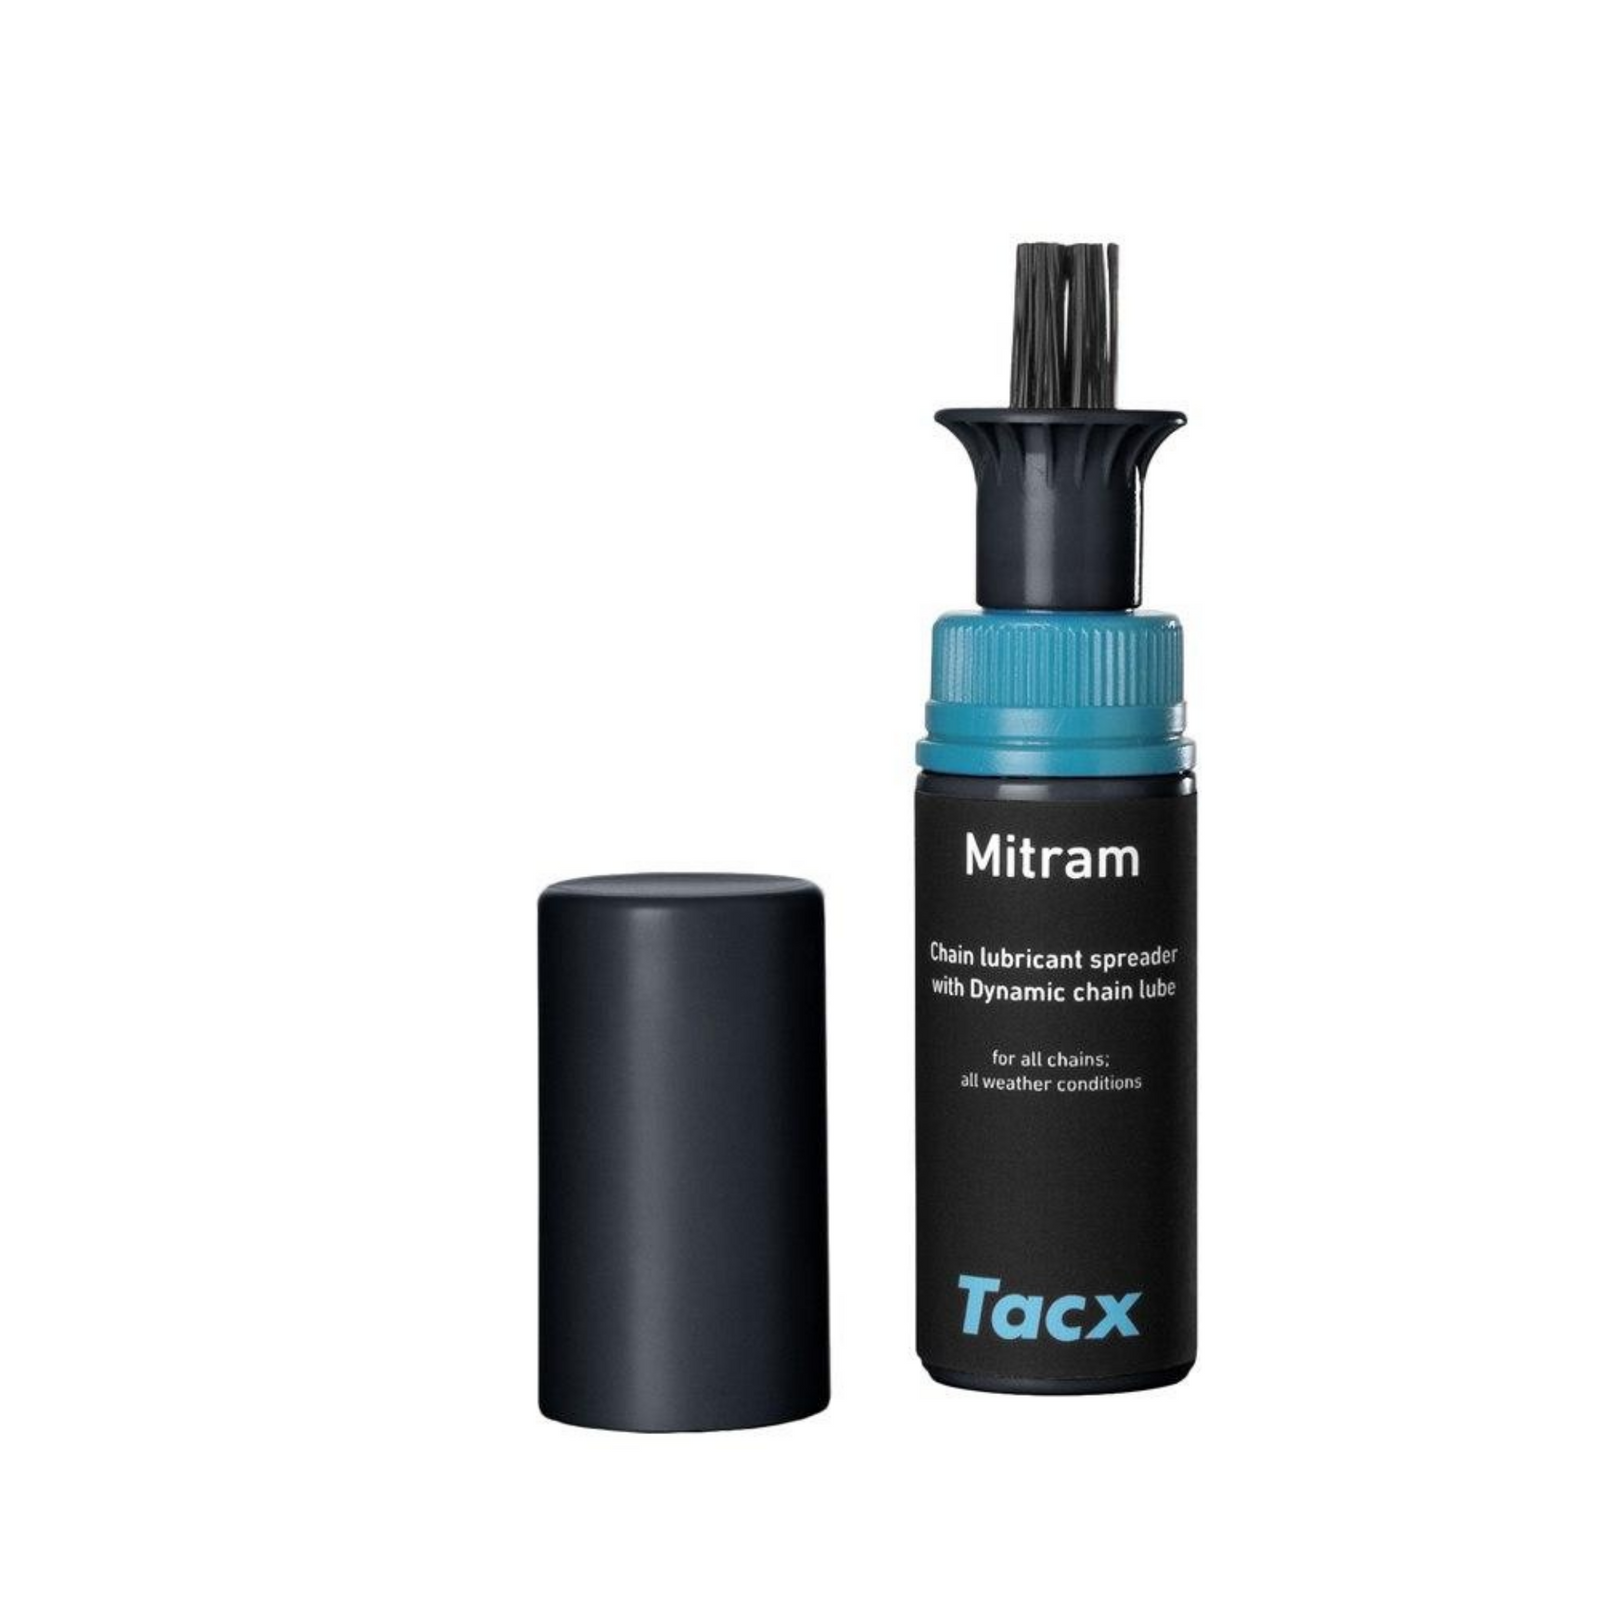 Tacx mitram chain oil 35 ml with brush